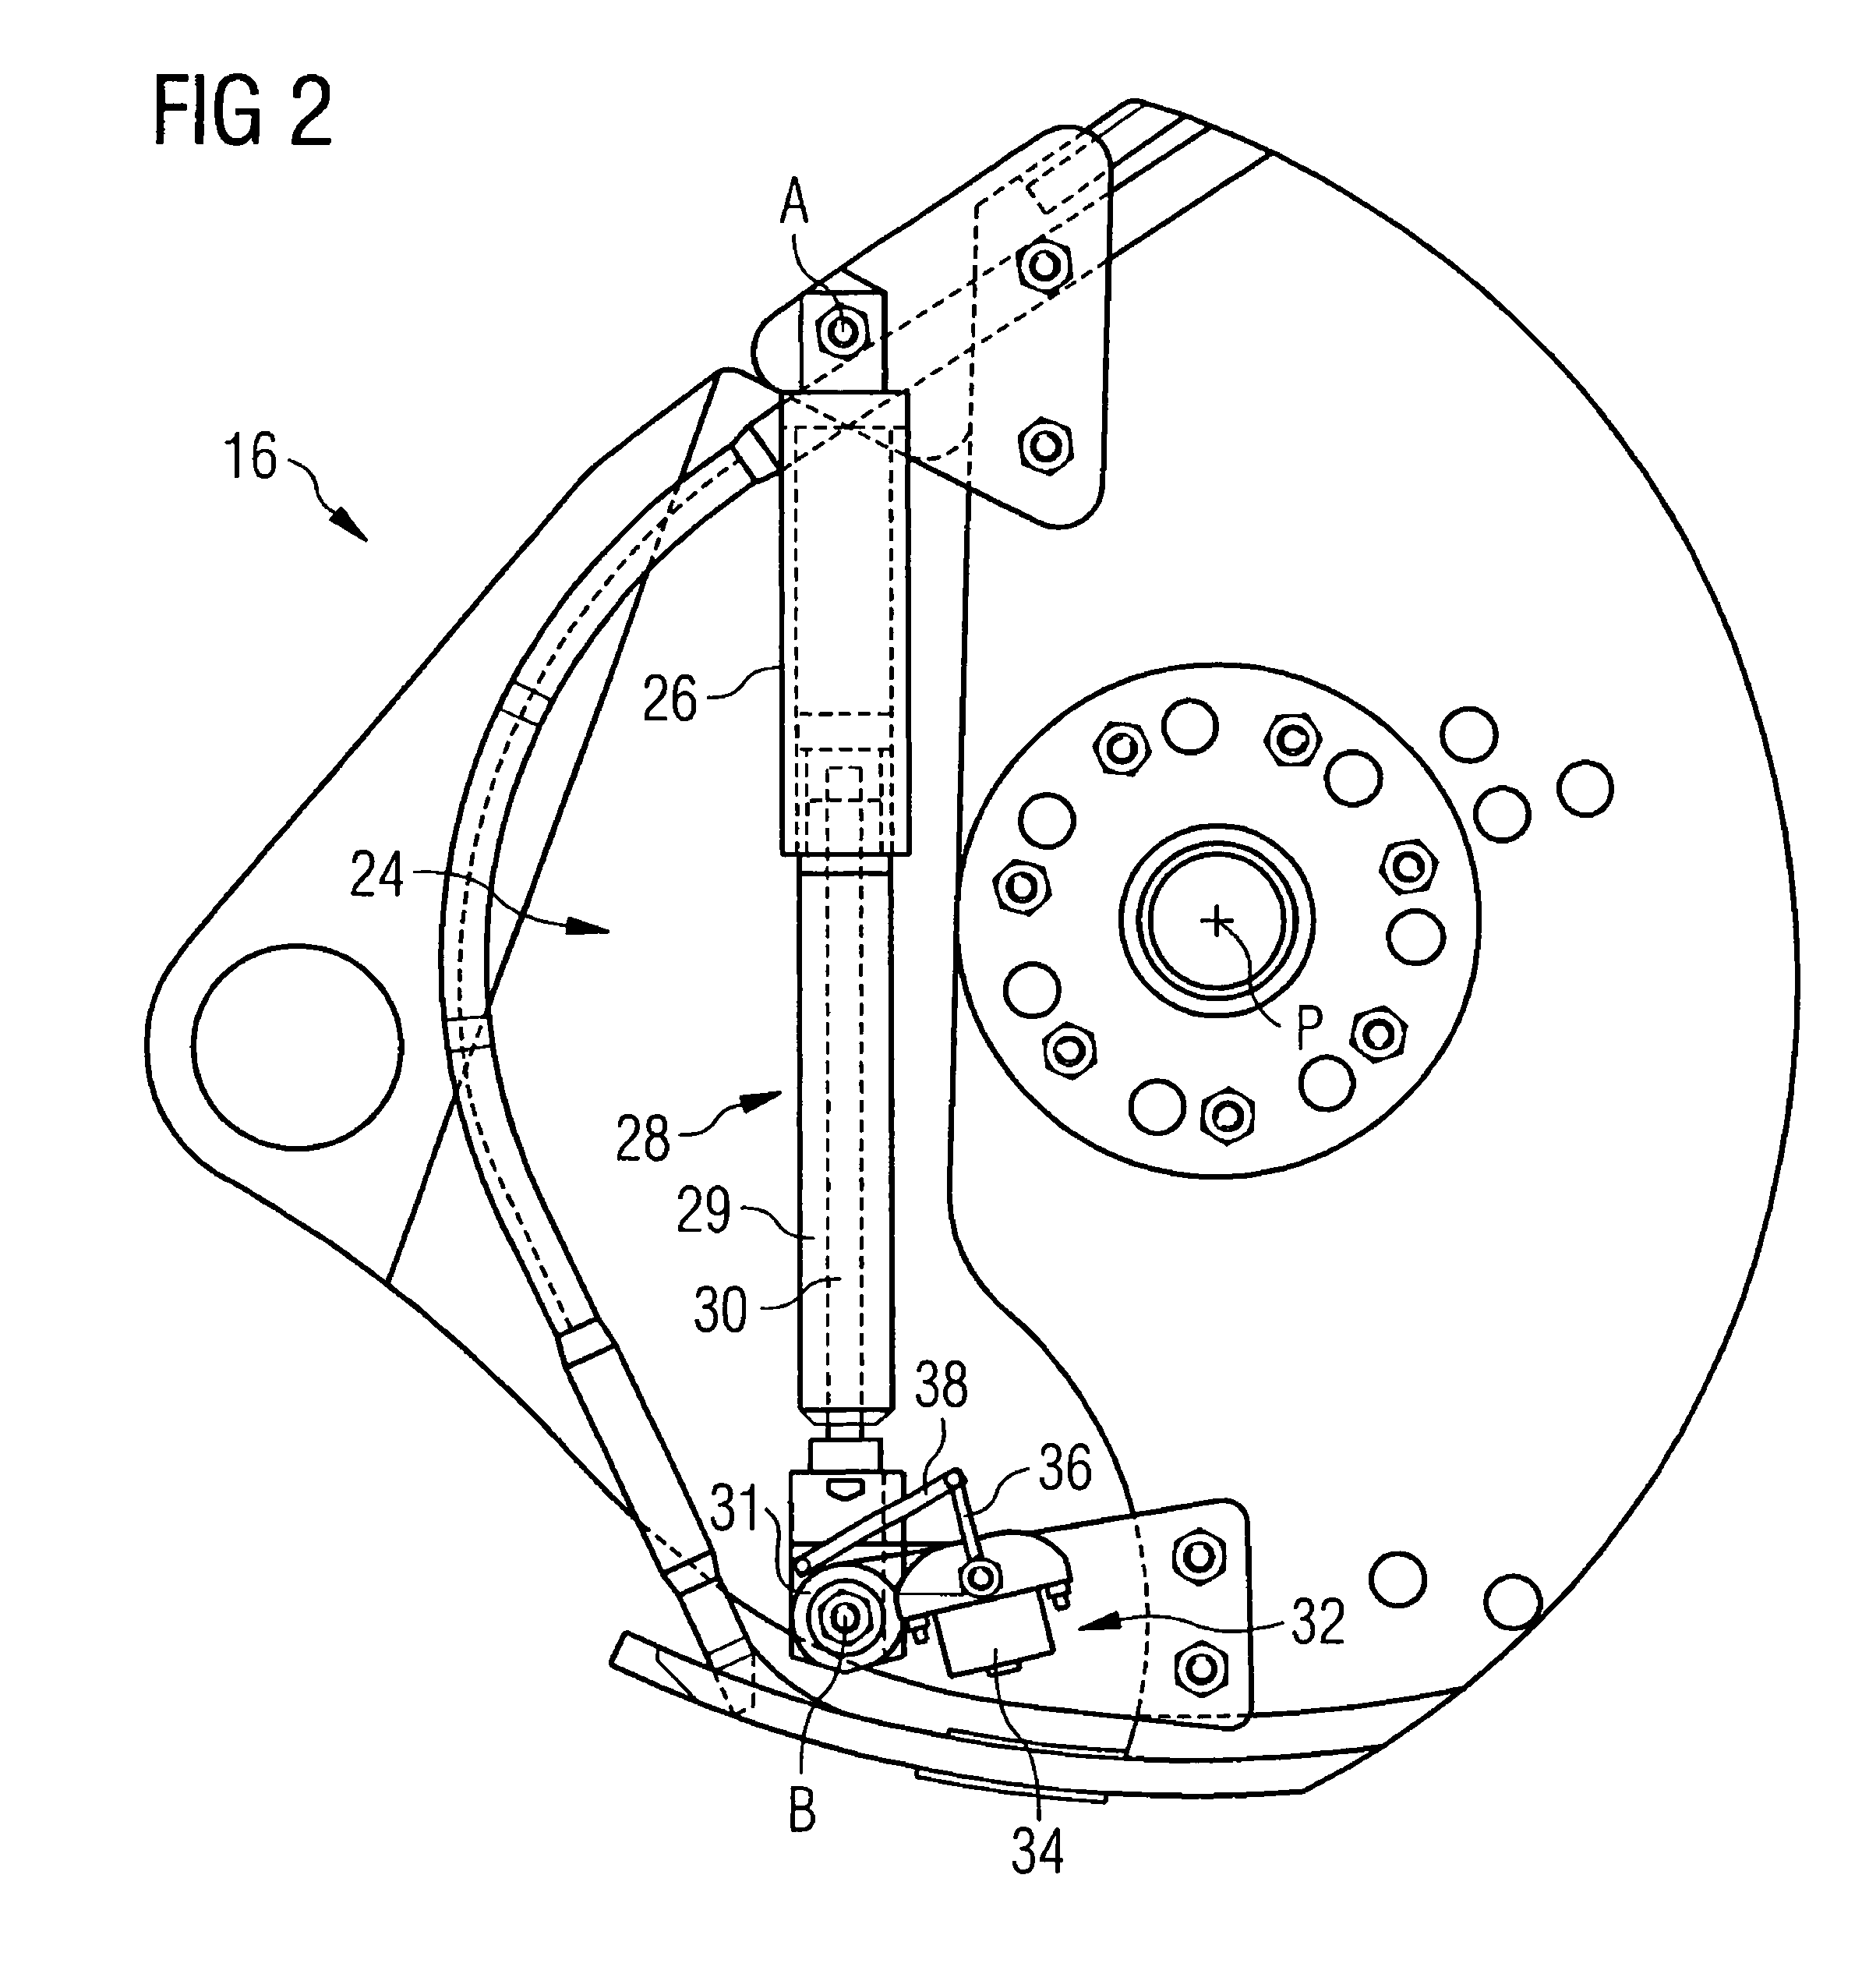 Force assisting system for luggage system